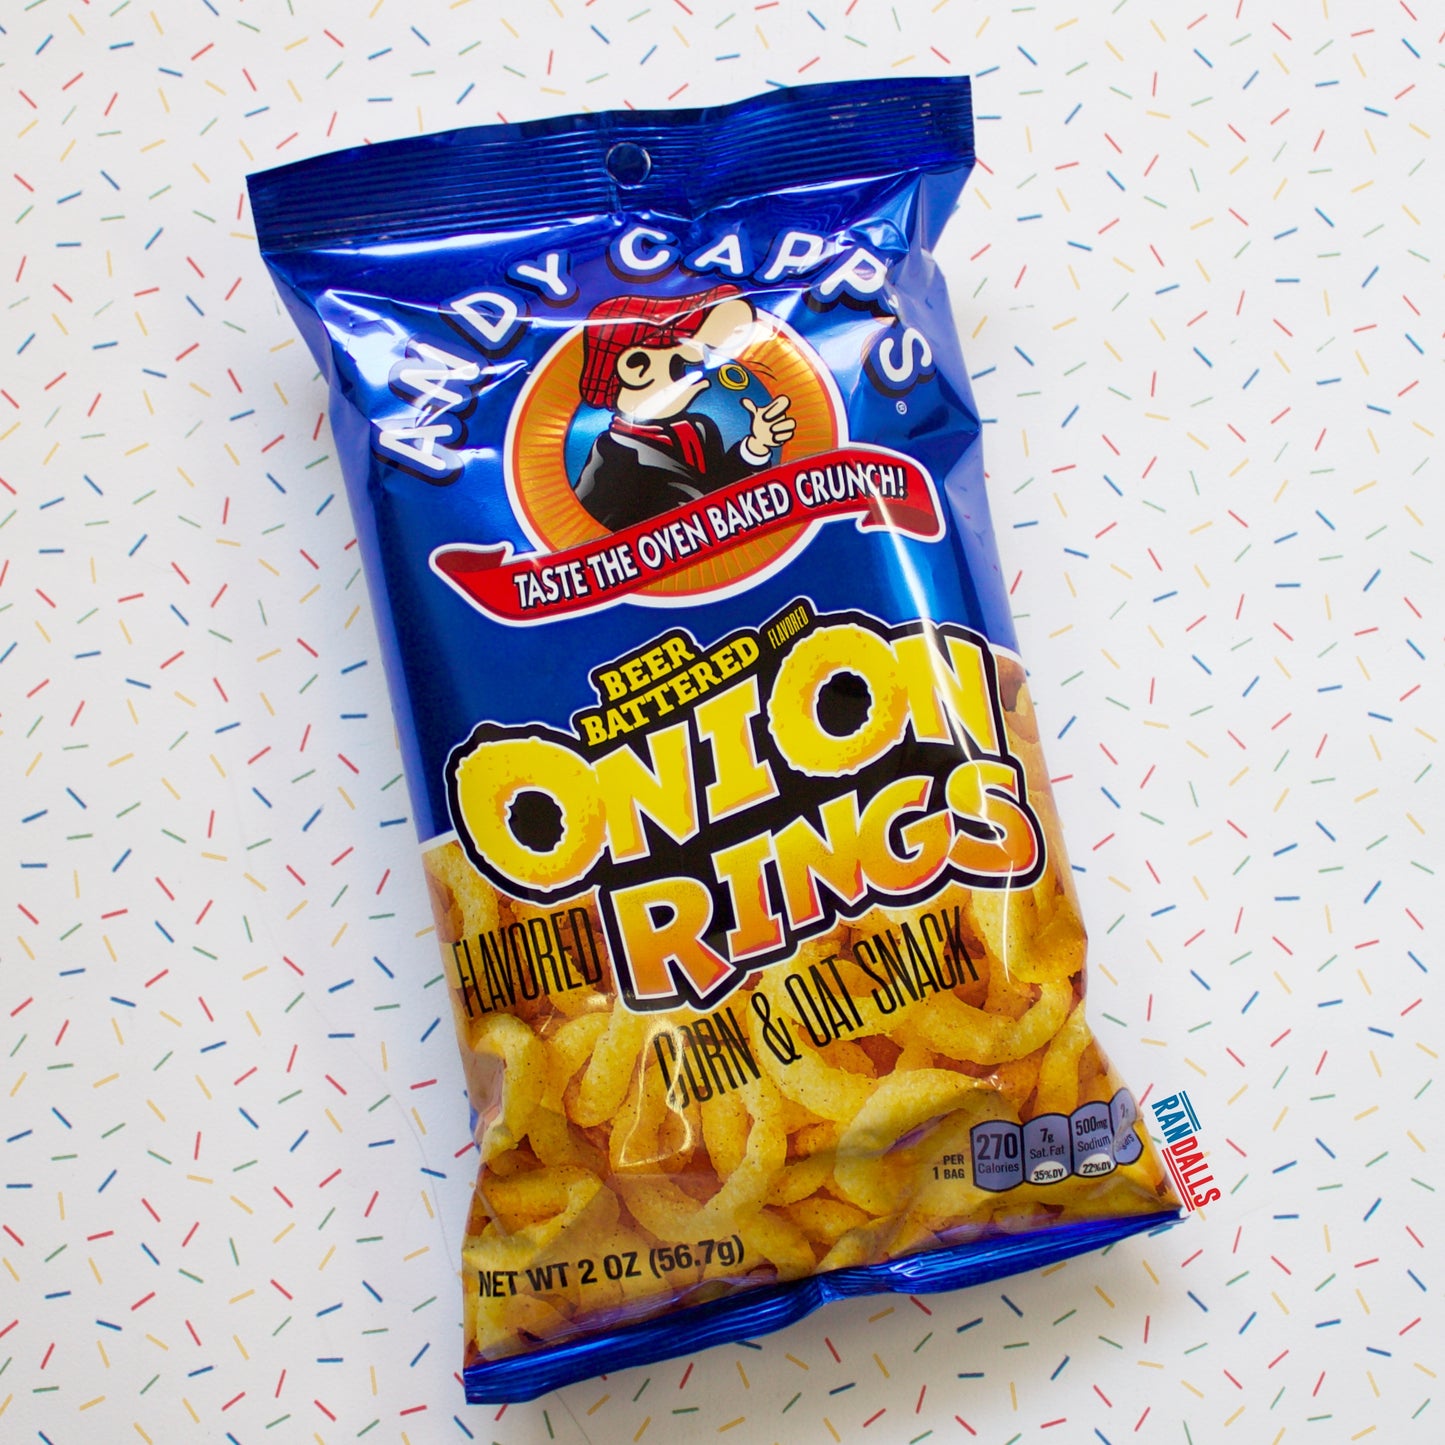 andy capps beer battered onion rings, corn and oat snack, crispy, chips, crisps, usa, randalls